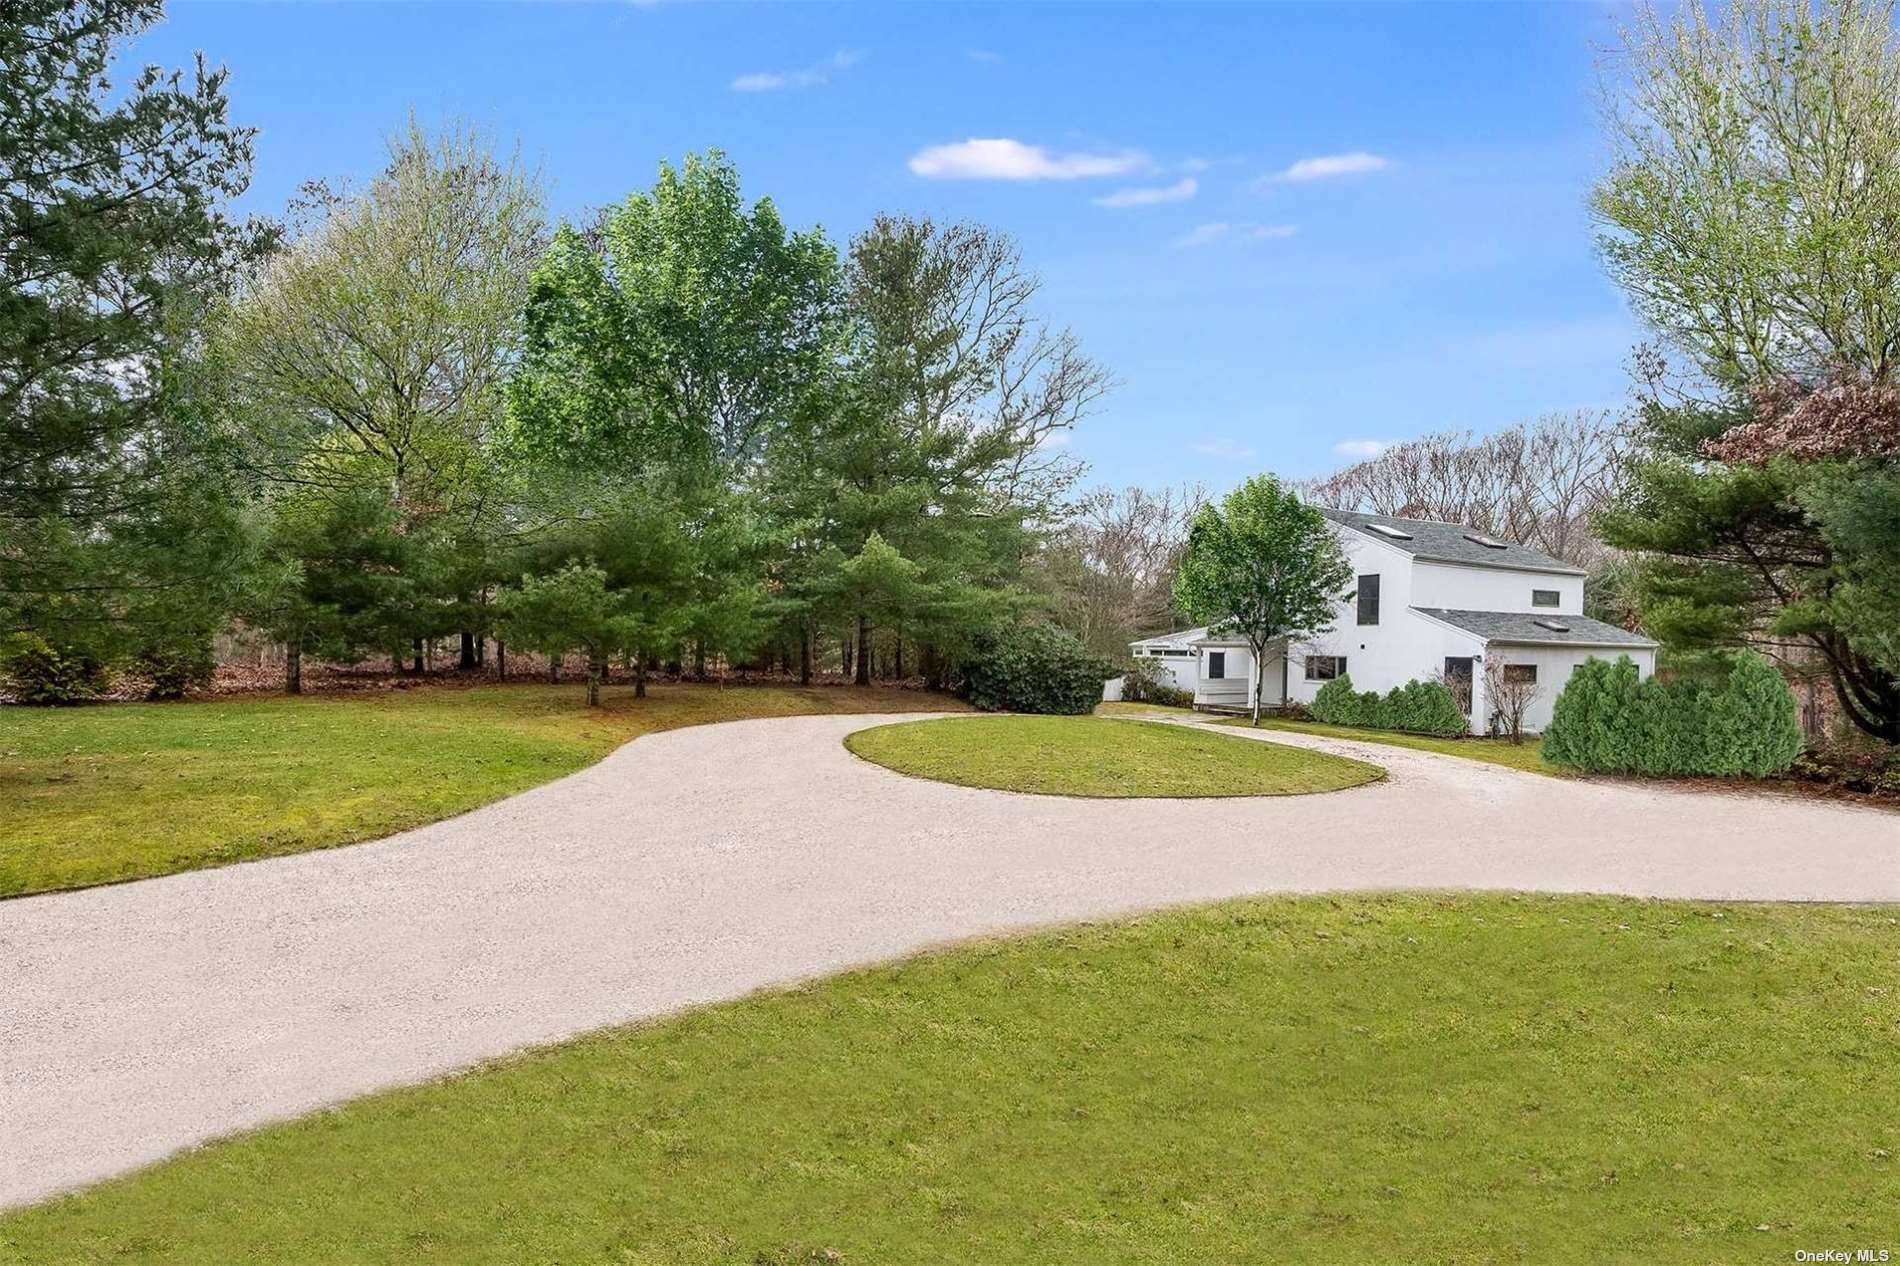 Sited on a sprawling 1. 62 acre parcel in Northwest East Hampton, this spacious Contemporary is conveniently near Cedar Park, Sammys Beach, and the renowned villages of Sag Harbor and ...